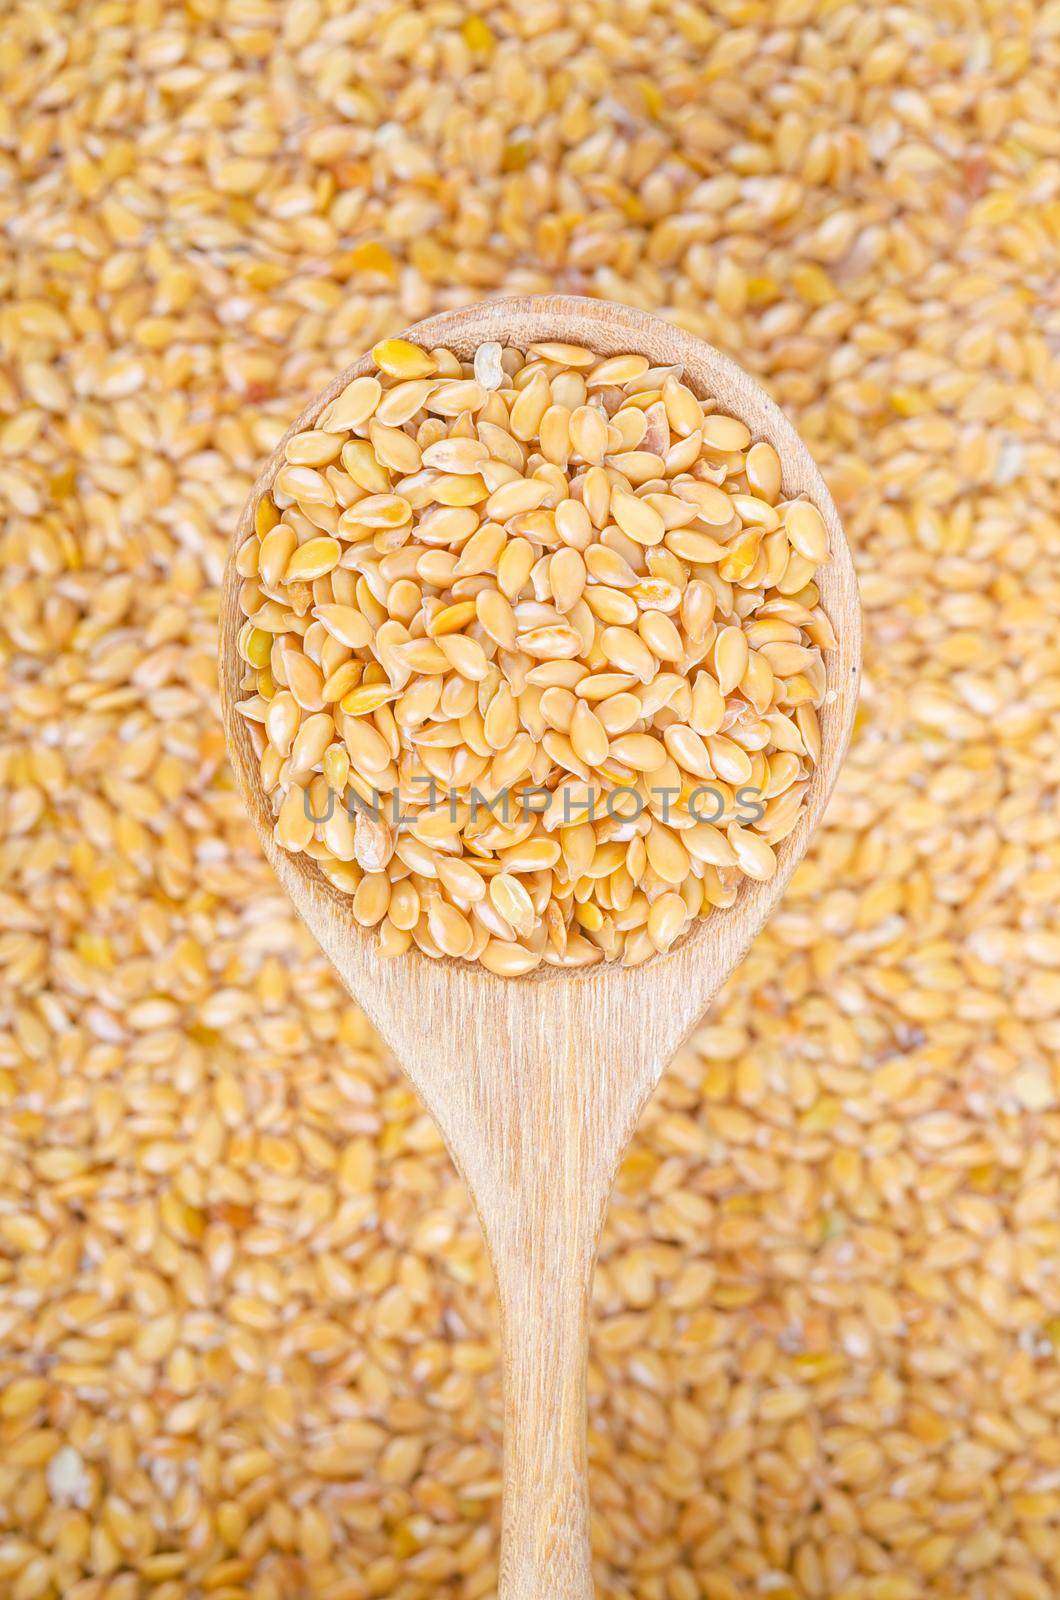 Gold flax seeds in a wooden spoon on a flax seeds background. by Gamjai